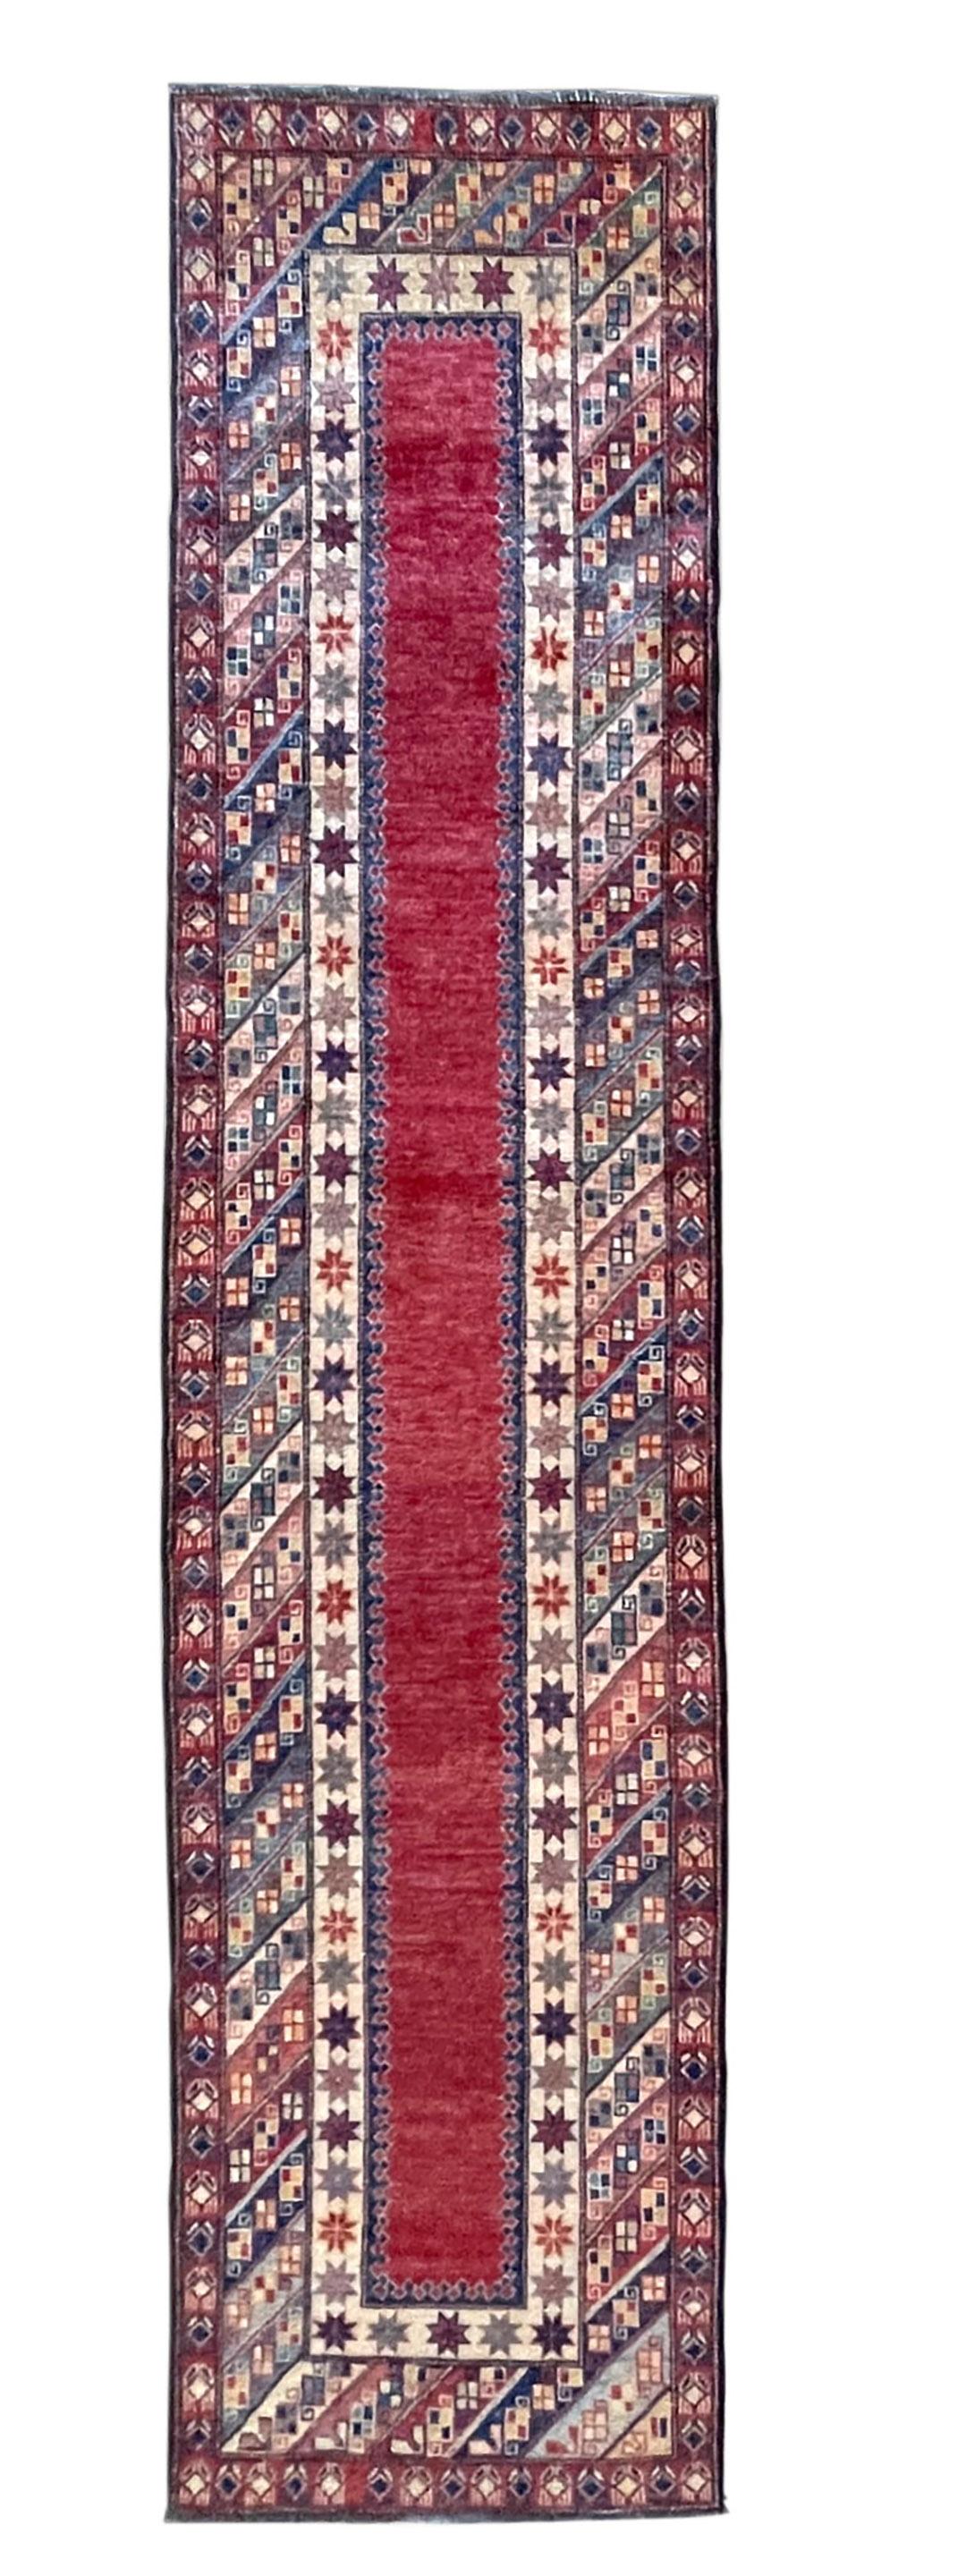 This tribal design runner rug is made in Pakistan, it has wool pile and cotton foundation. The base color is red and the border has multi colors. The design is geometric. The size is this piece is 2 feet 8 inch wide by 11 feet 11 inch tall. This is